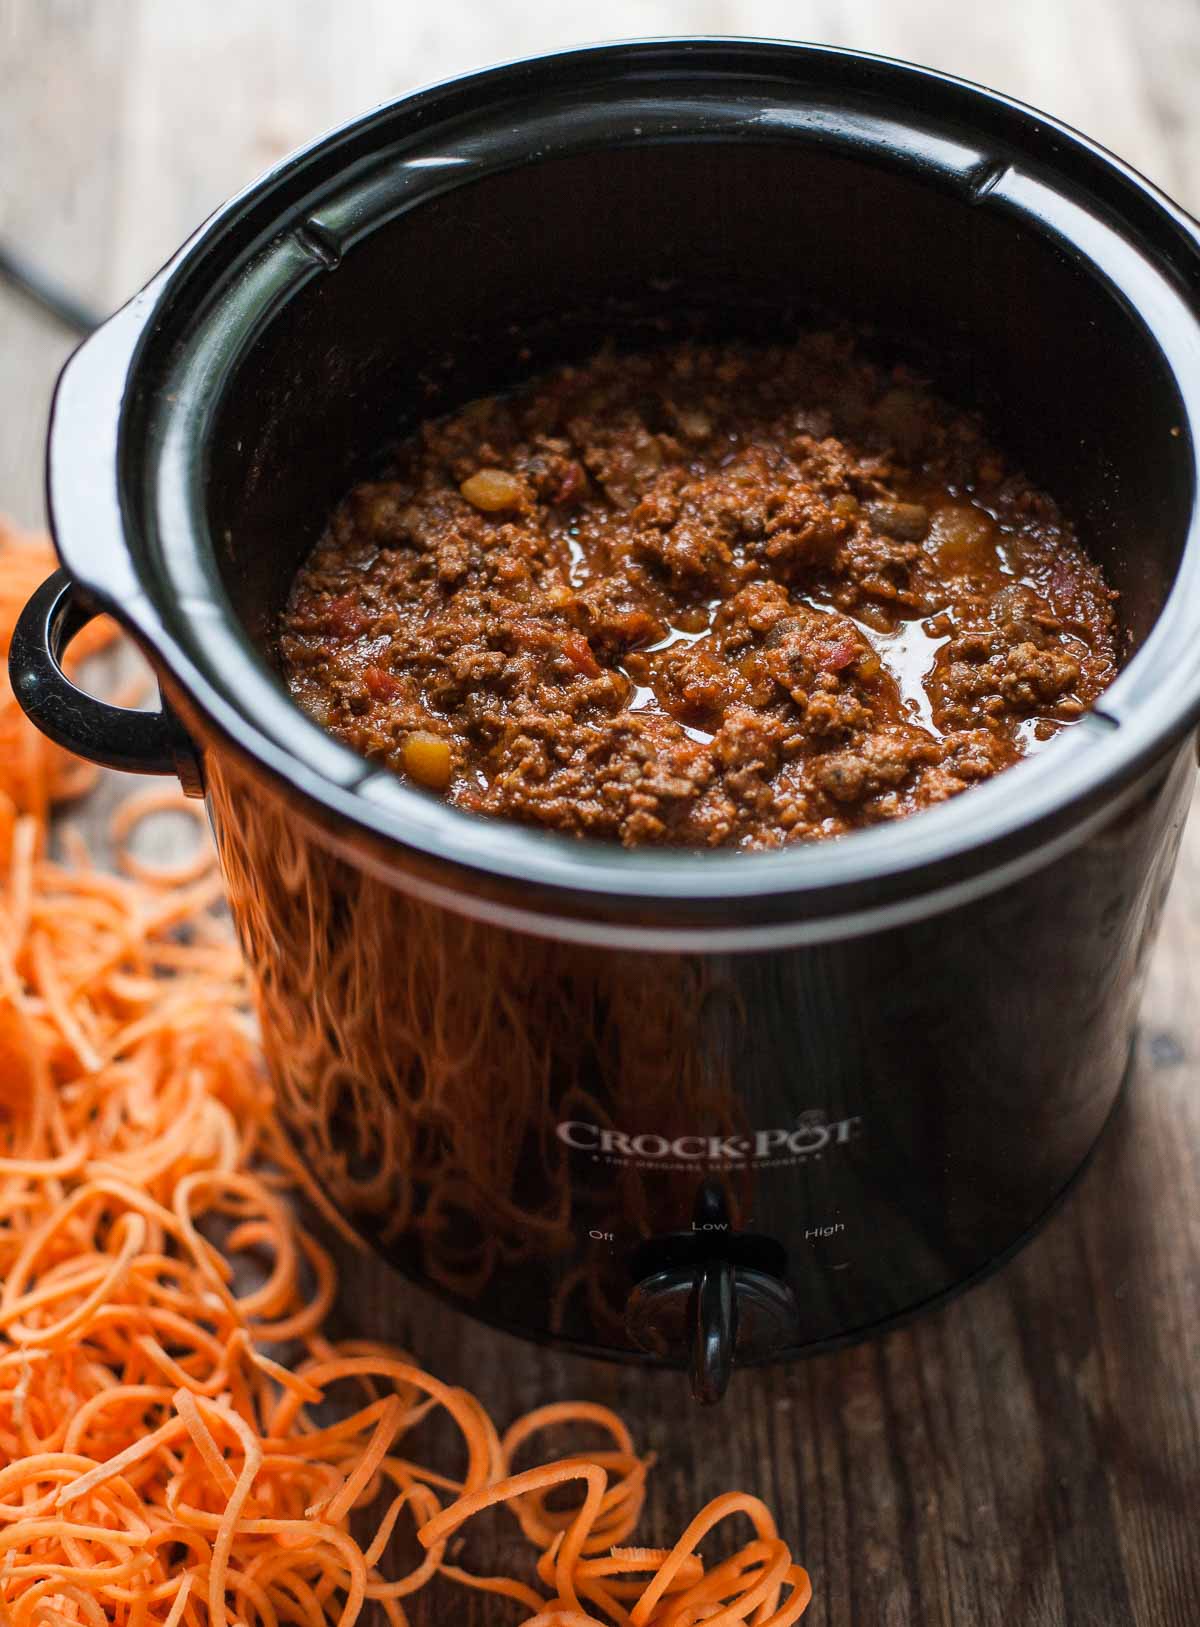 Slow-Cooked Bolognese Sauce with Sweet Potato Spaghetti (Gluten free, Paleo, Whole30) | acalculatedwhisk.com